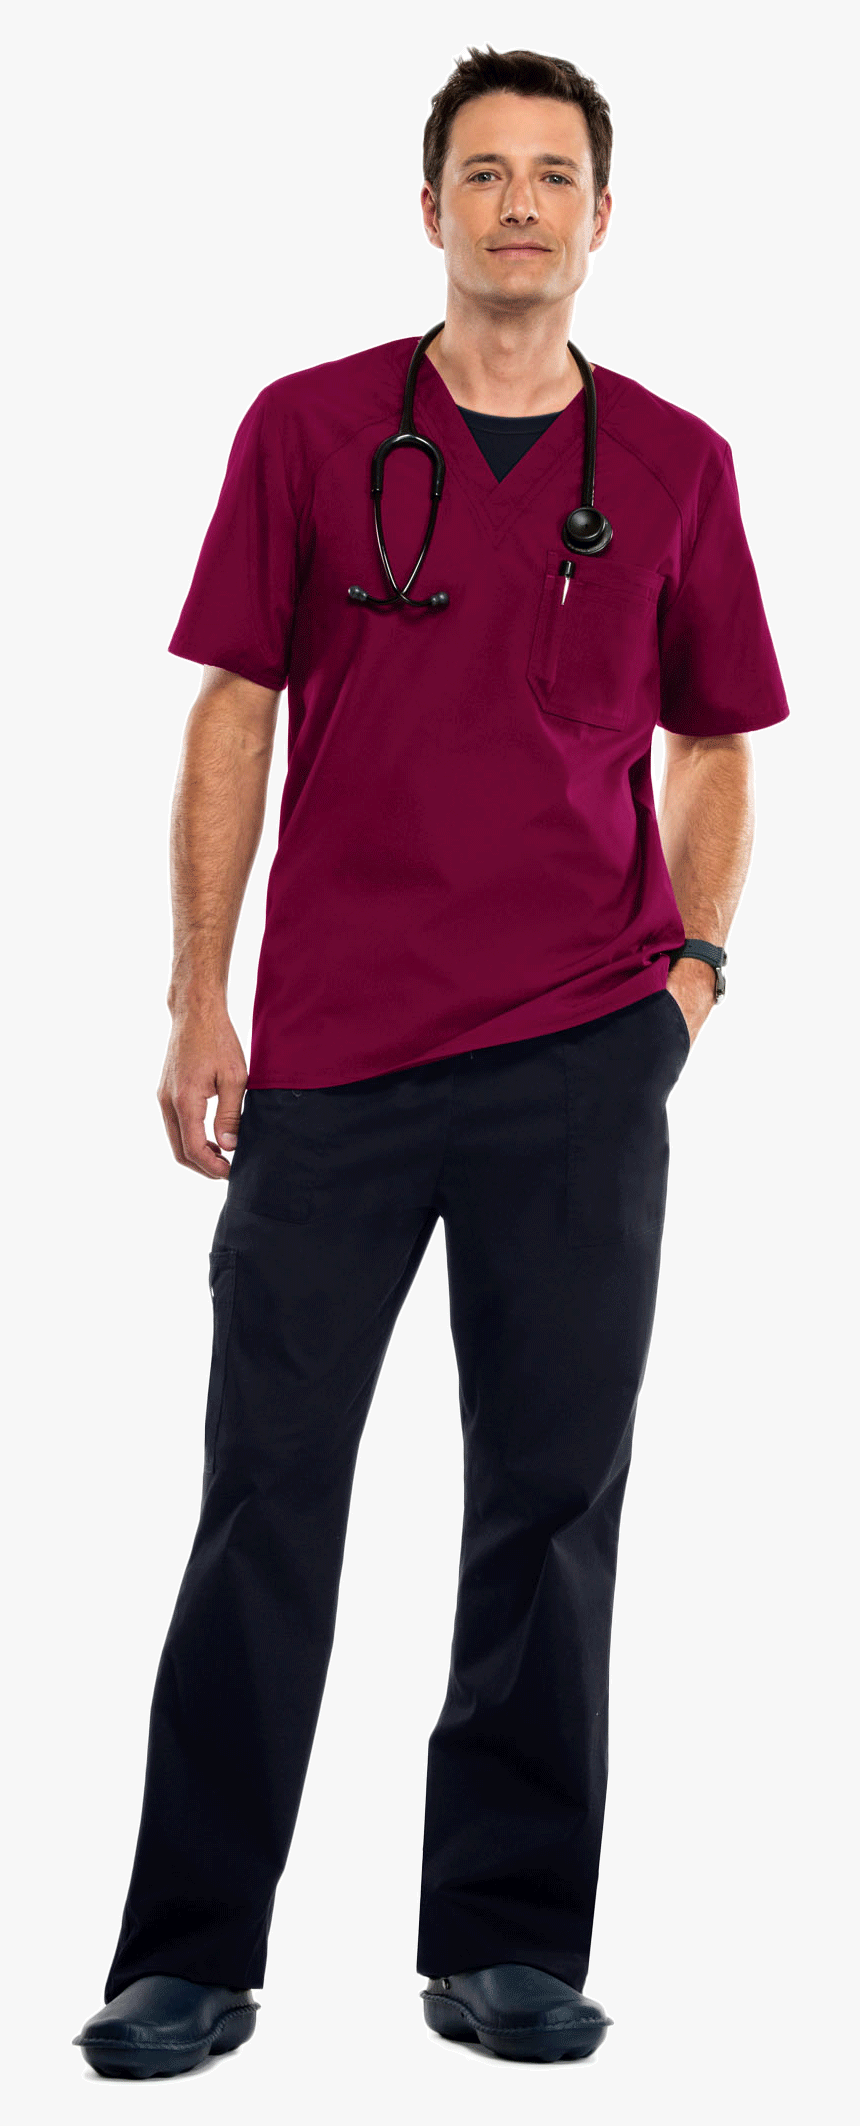 Maroon And Black - Maroon And Black Scrubs, HD Png Download, Free Download